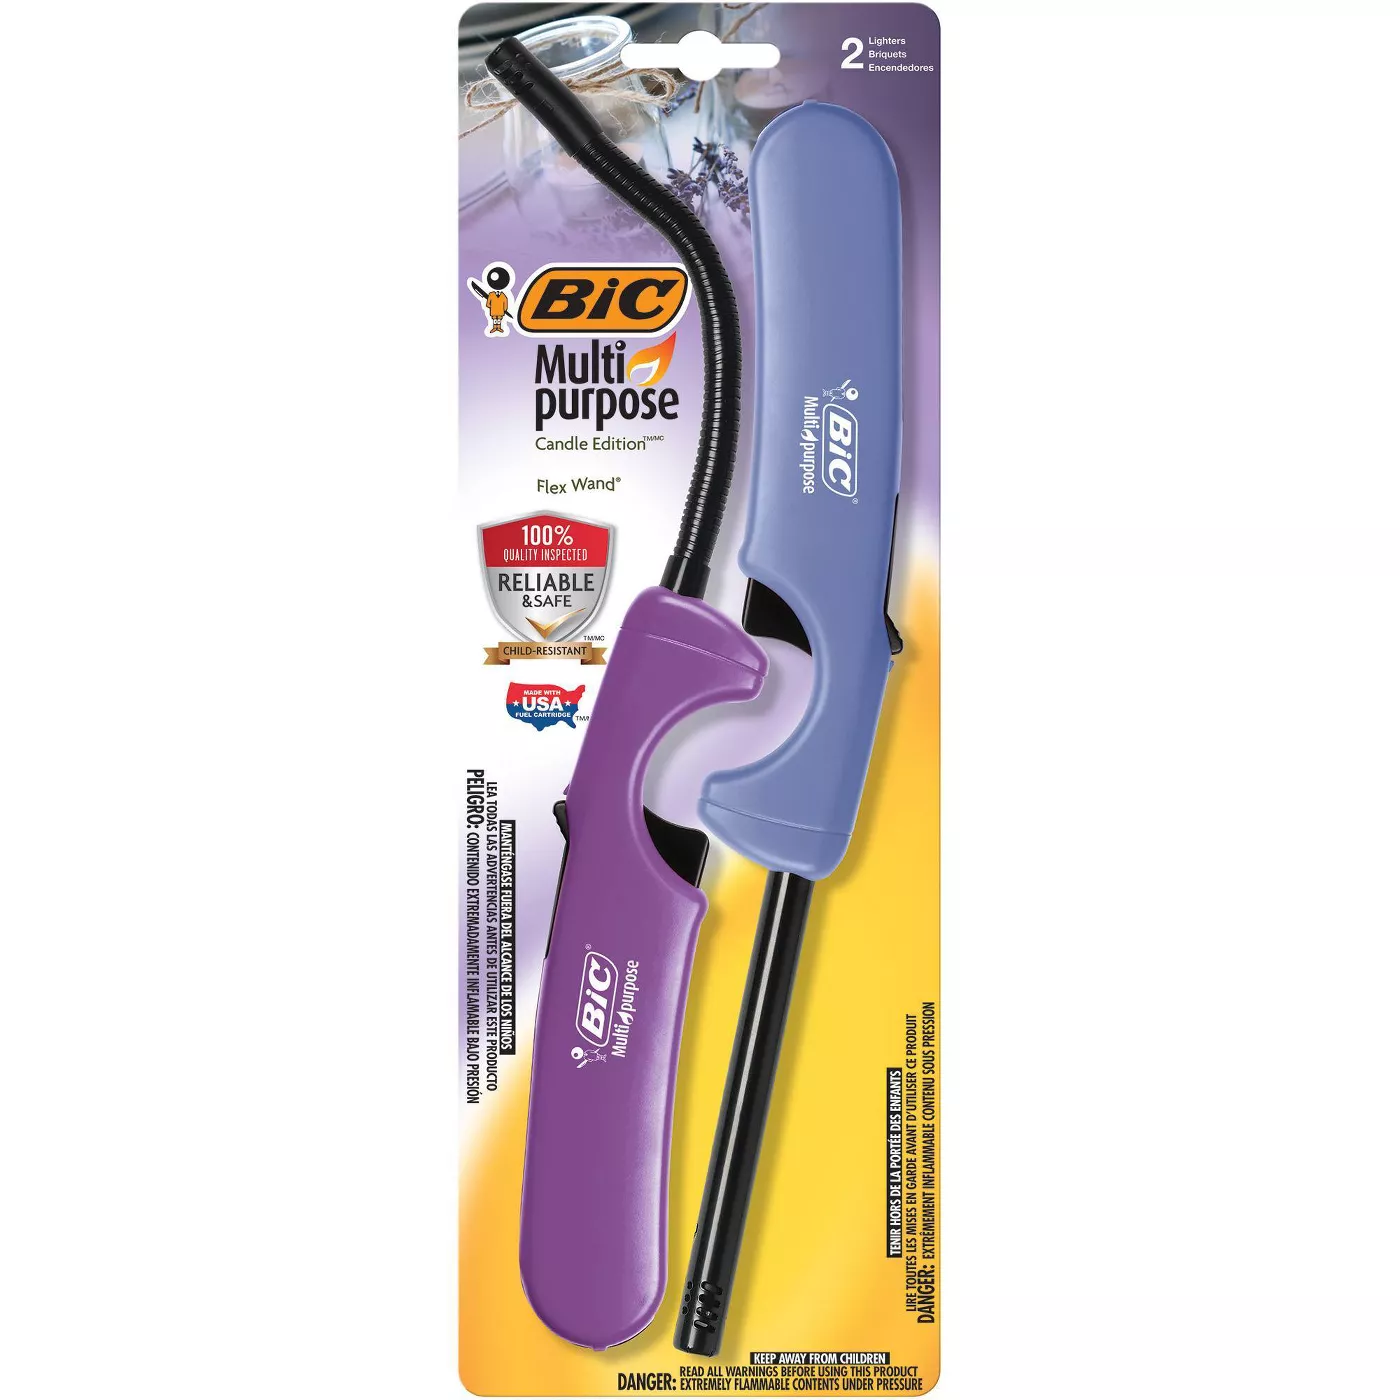 BIC 2pk Combo Candle Edition Multi-Purpose and Flex Wand Lighter - Blue/Purple - image 1 of 10